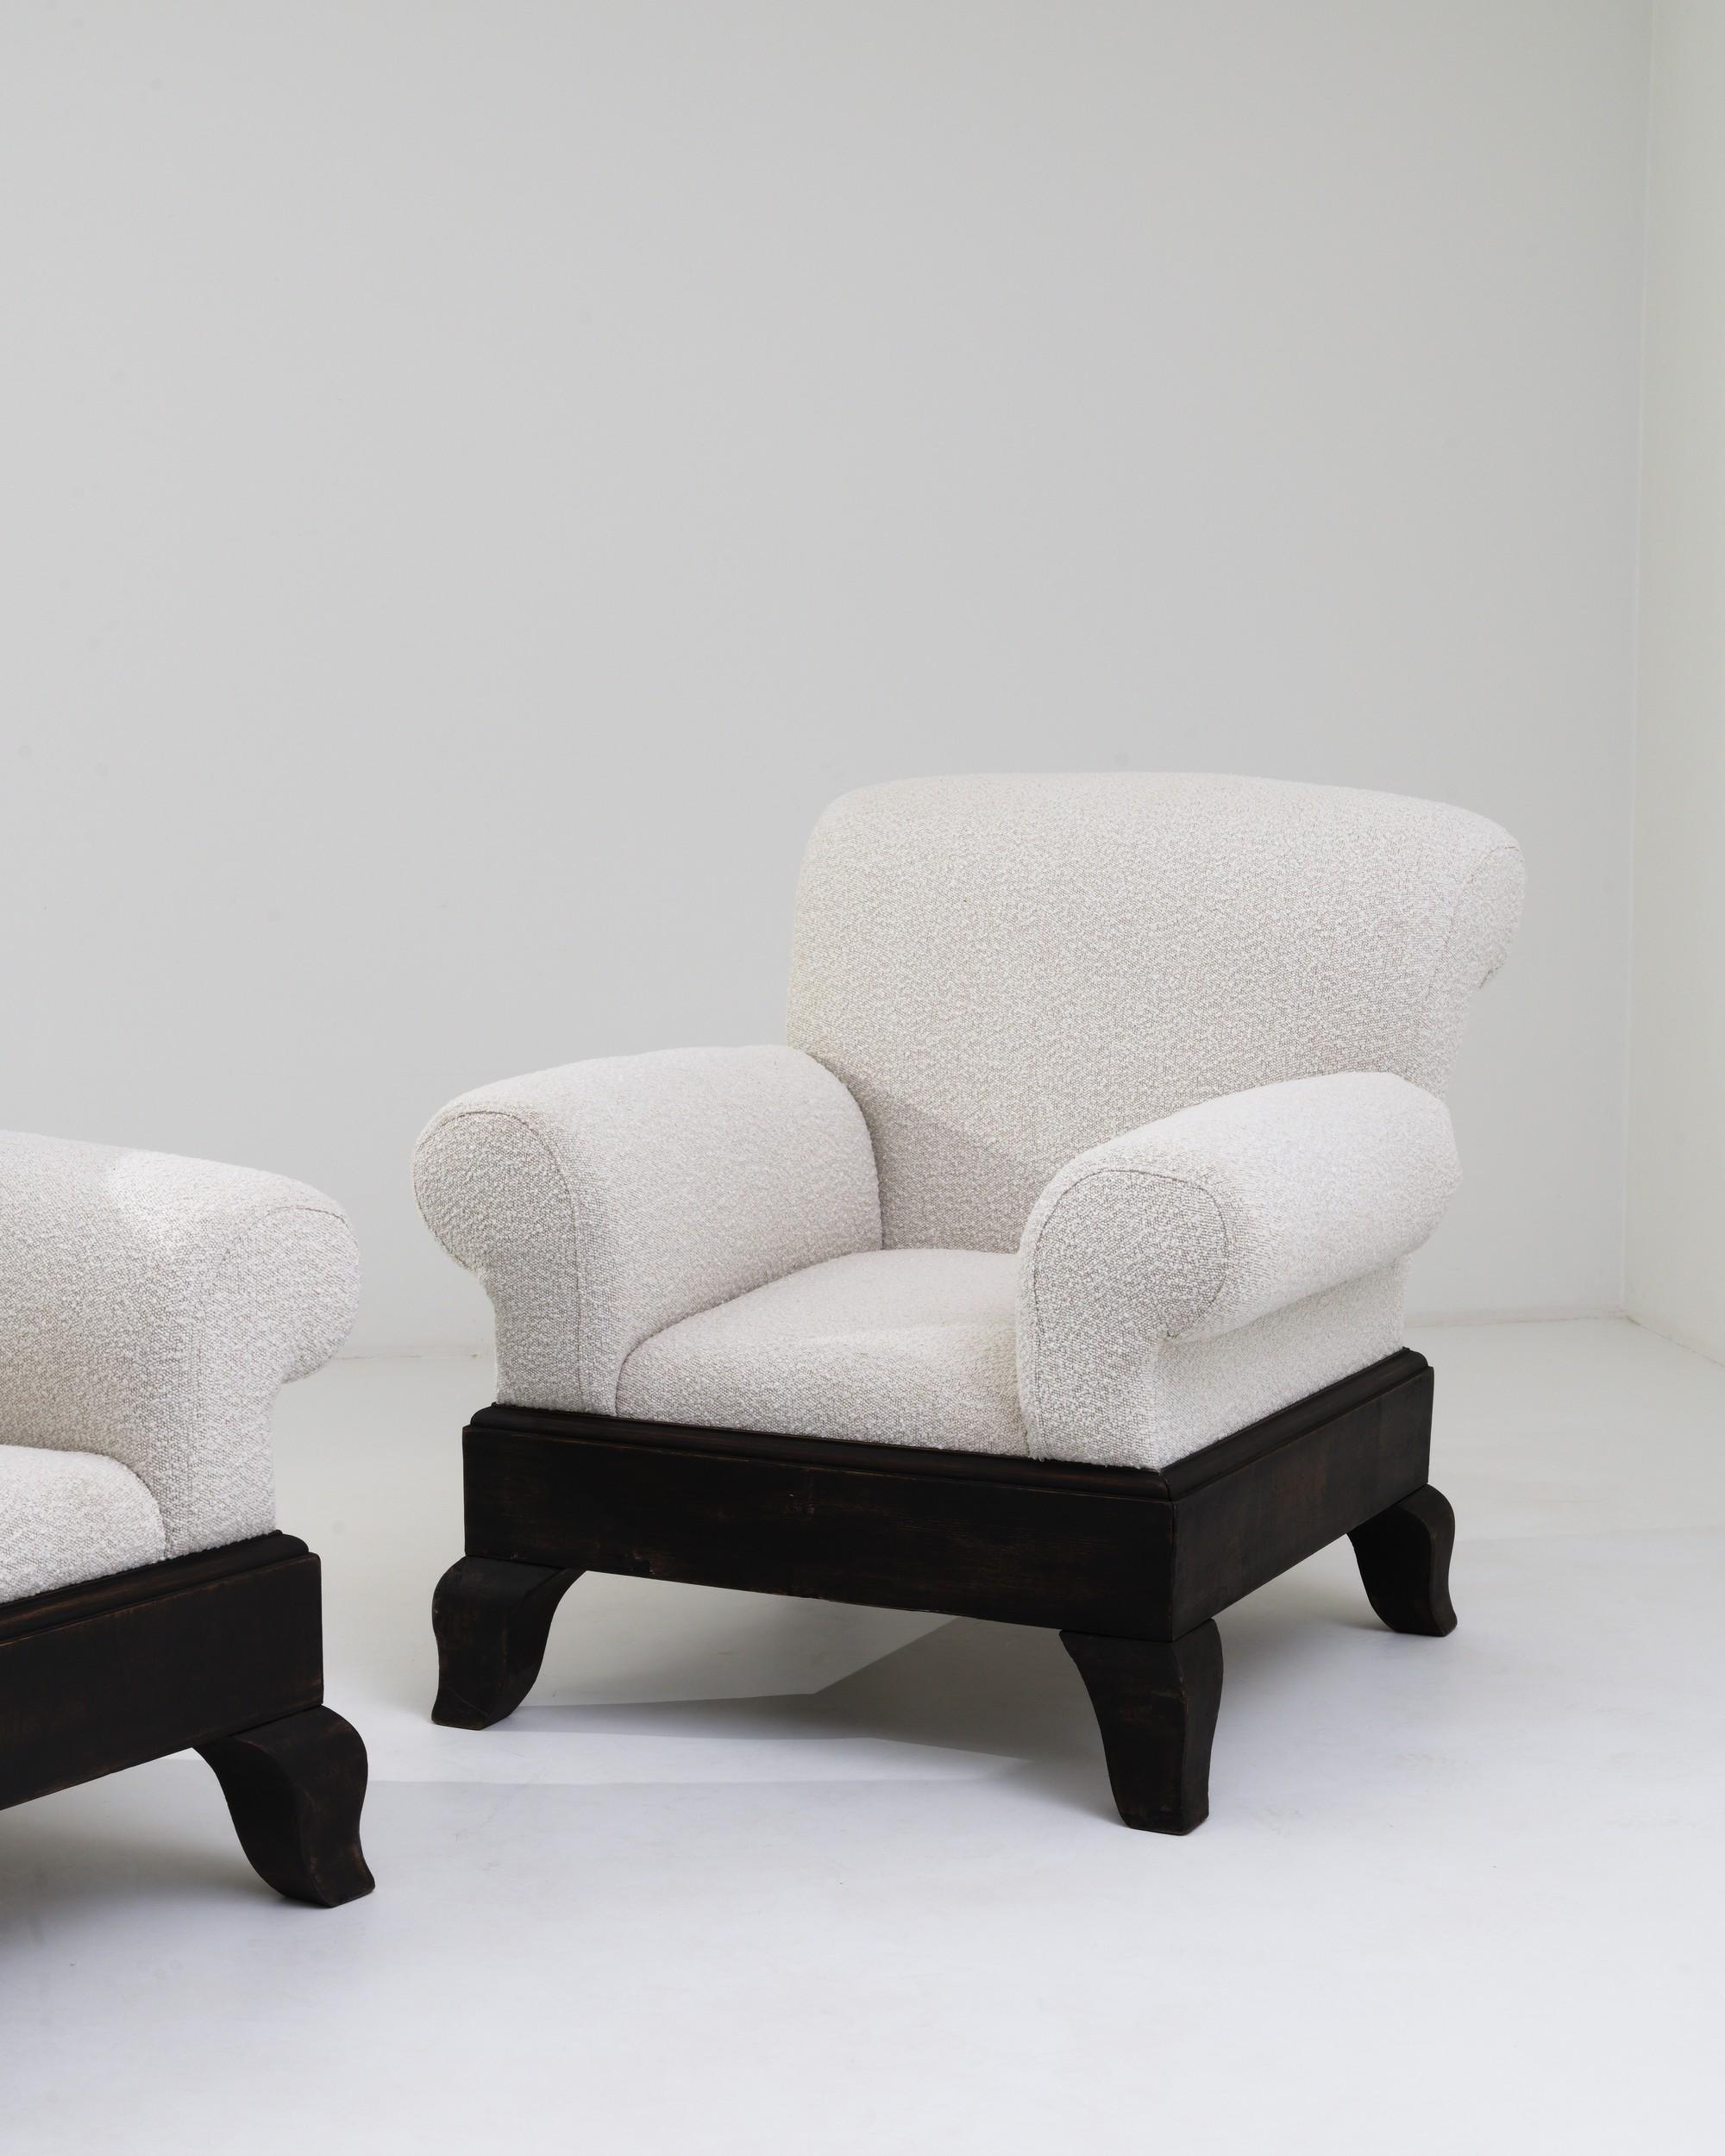 20th Century British Wooden Upholstered Armchairs, a Pair  For Sale 5